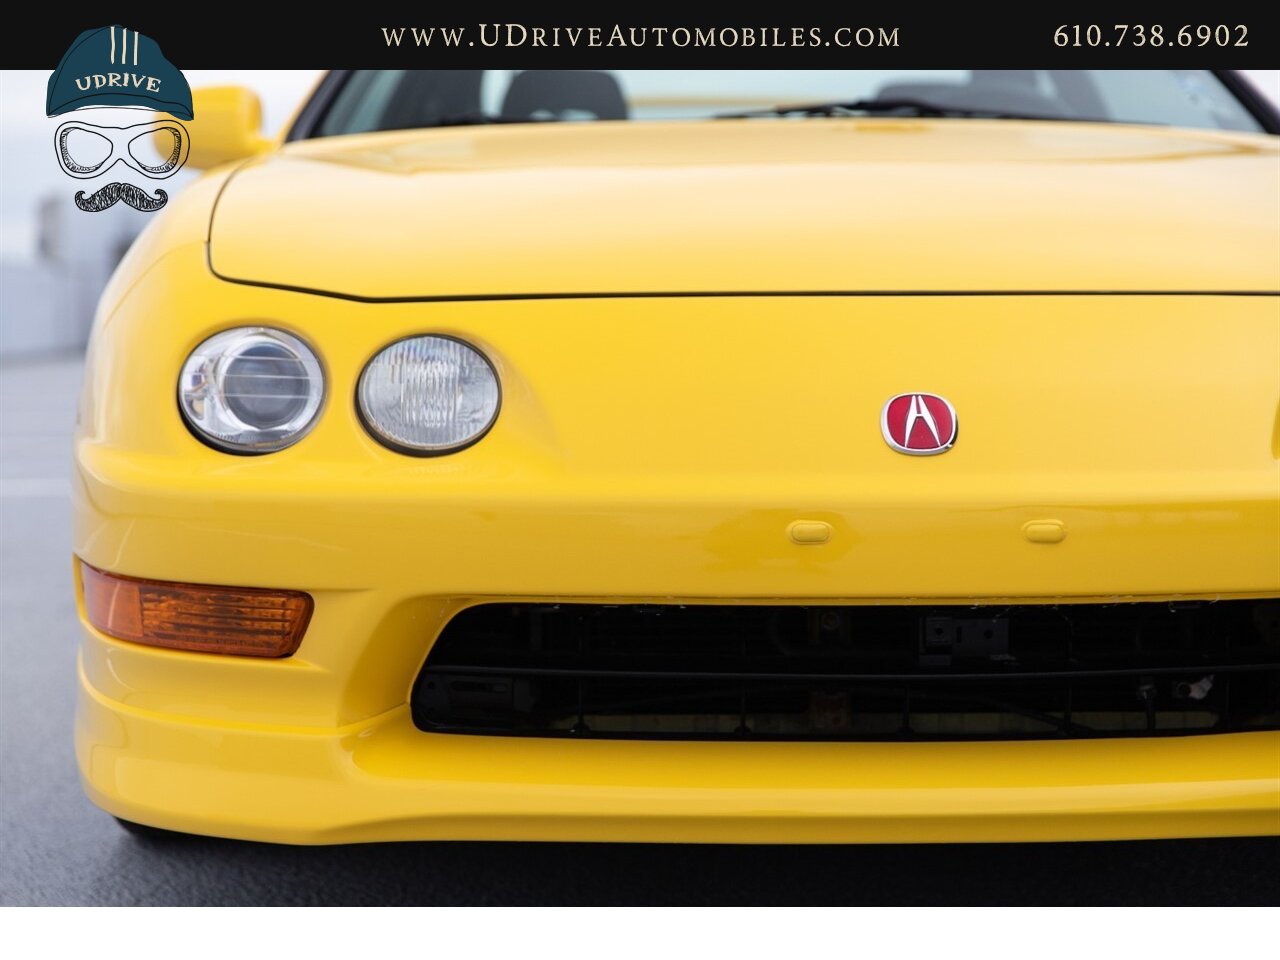 2001 Acura Integra Type R  38k Miles 2 Owners - Photo 10 - West Chester, PA 19382